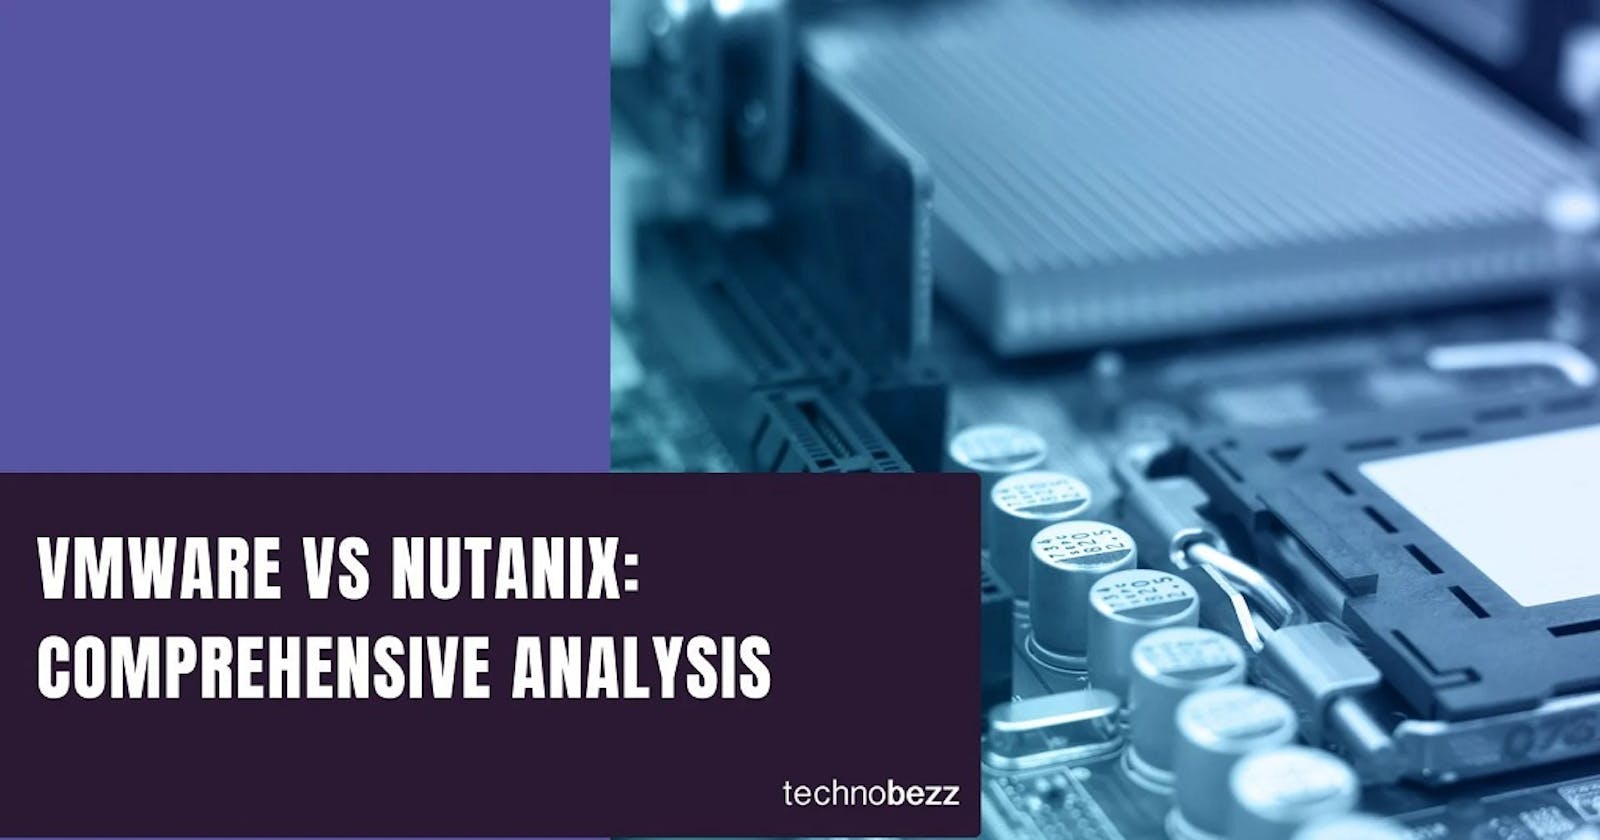 VMware and Nutanix: Which Comes Out on Top?